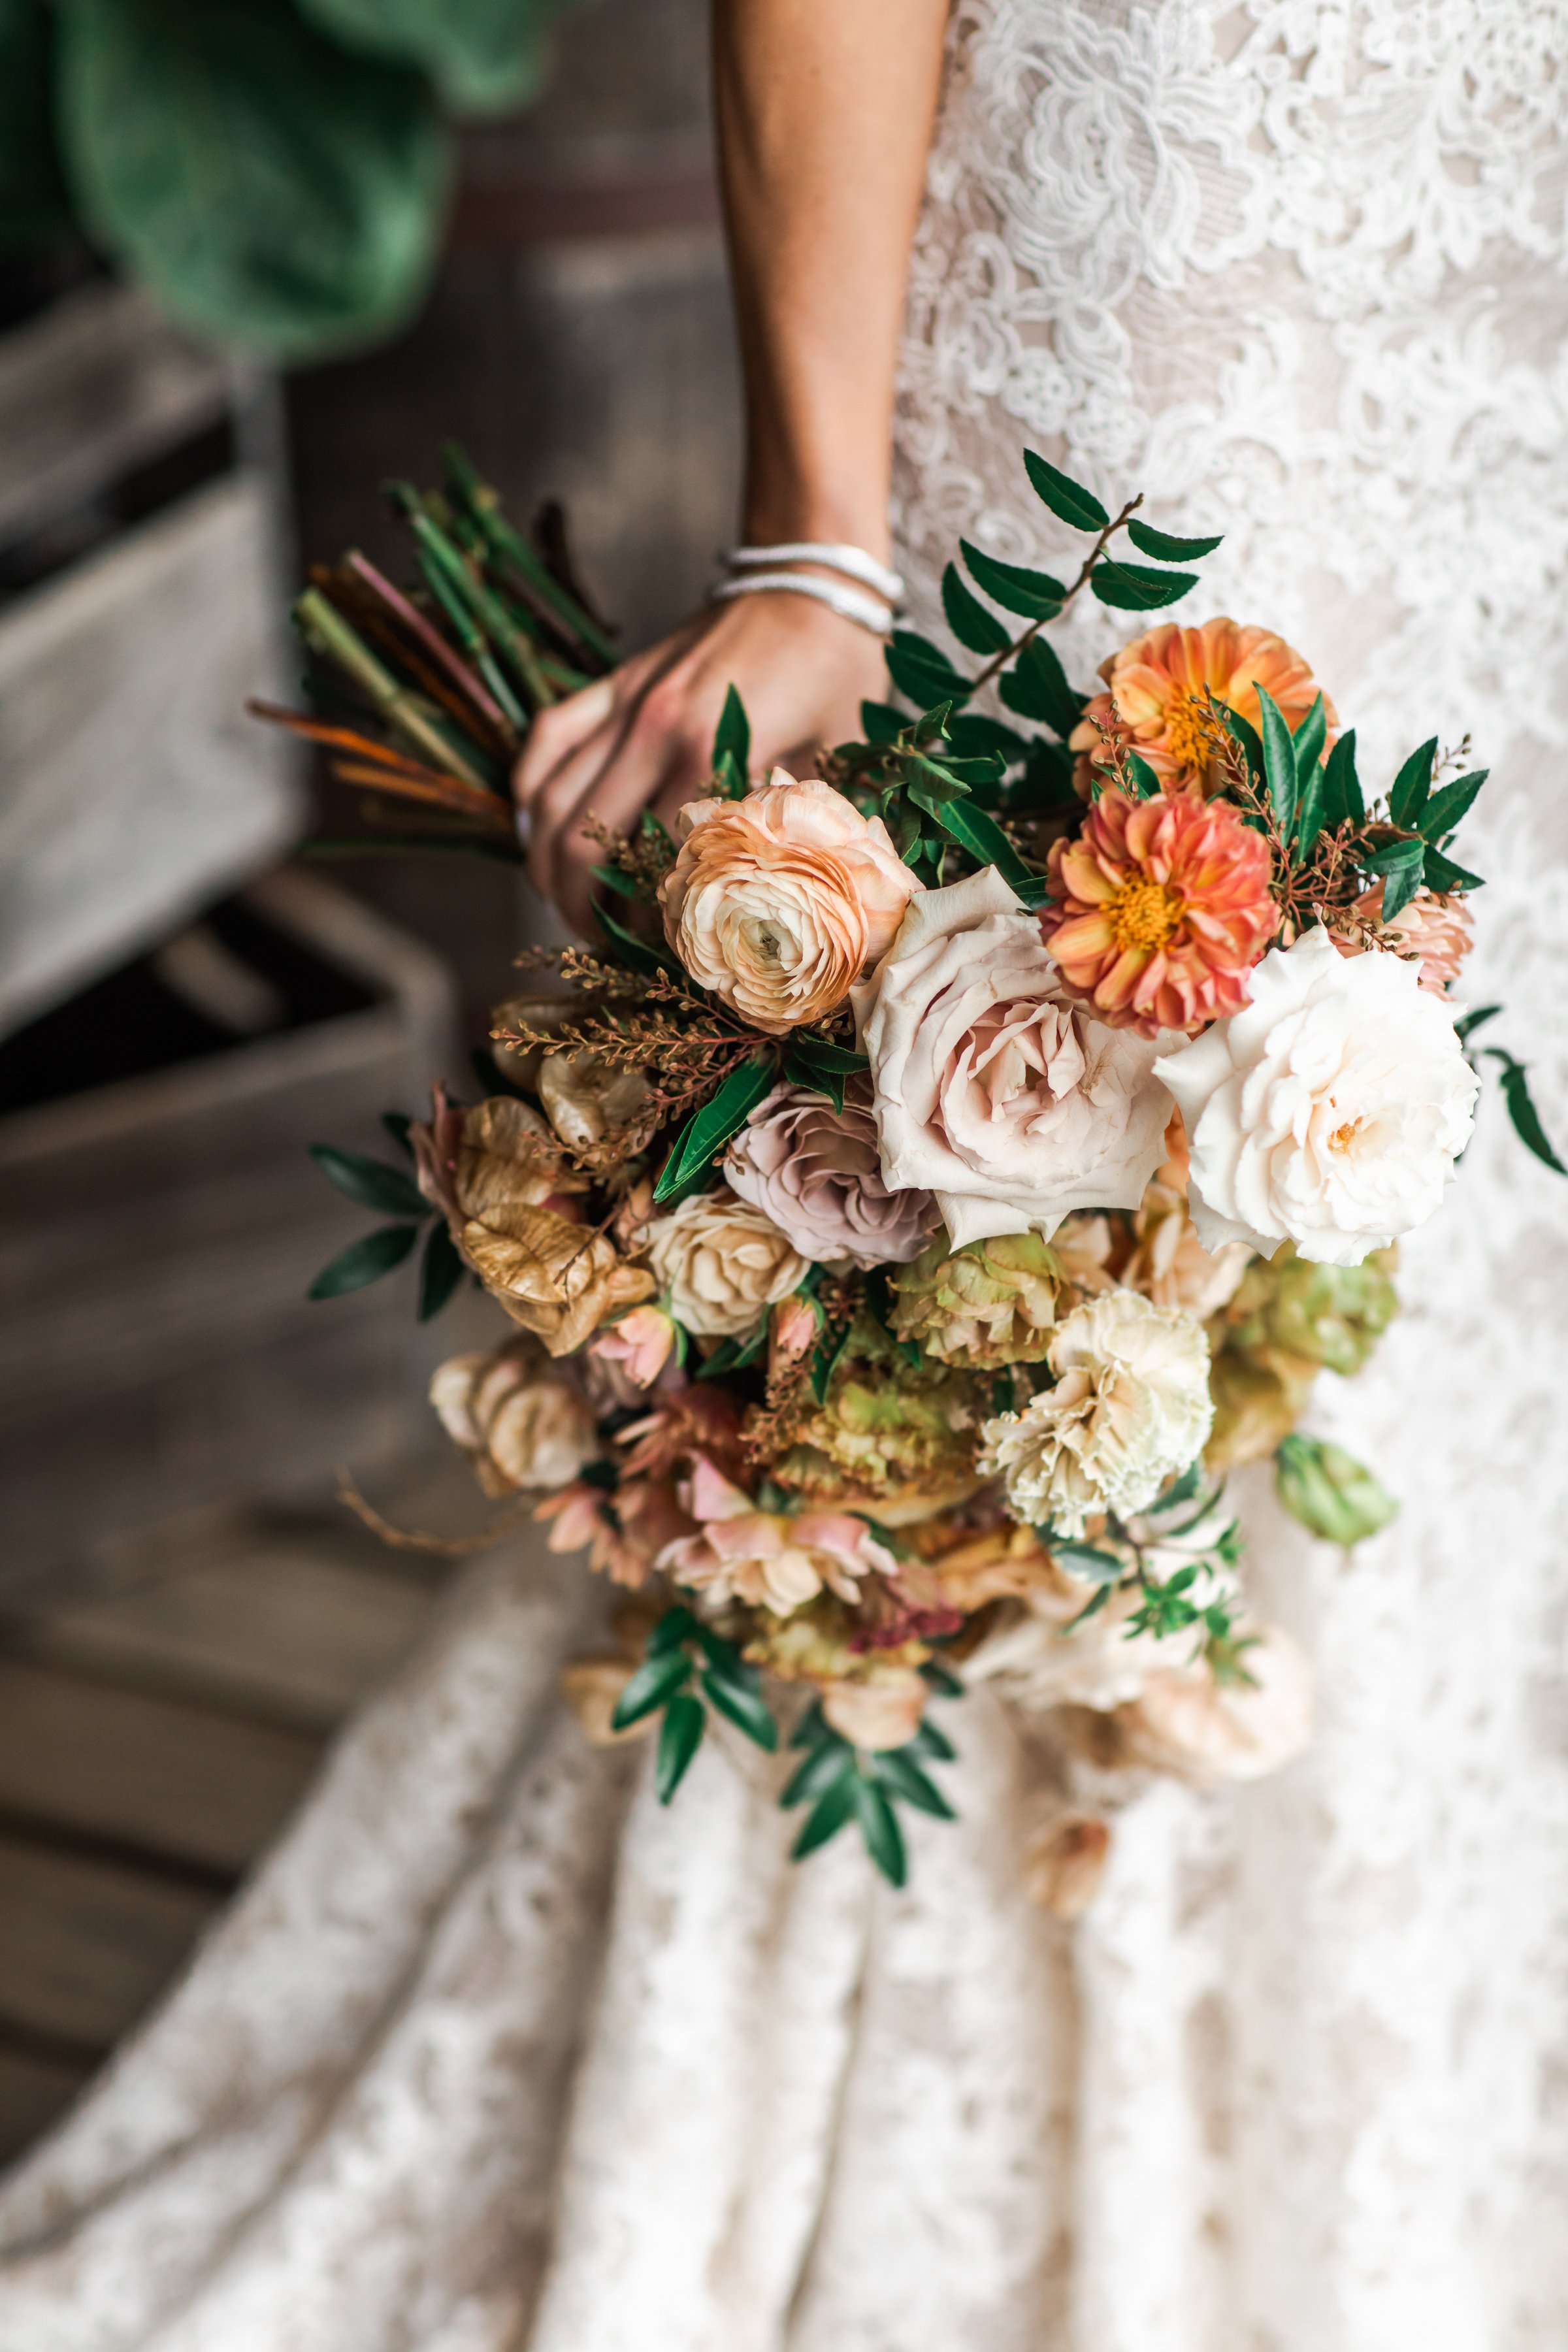 An elegant fall bridal bouquet featuring a sunset color palette of blush, terra cotta, rose gold, yellow, and copper. Florals accents of dahlias, garden roses, ranunculus, and double brownie tulips. Designed by Rosemary and Finch in Nashville, TN.